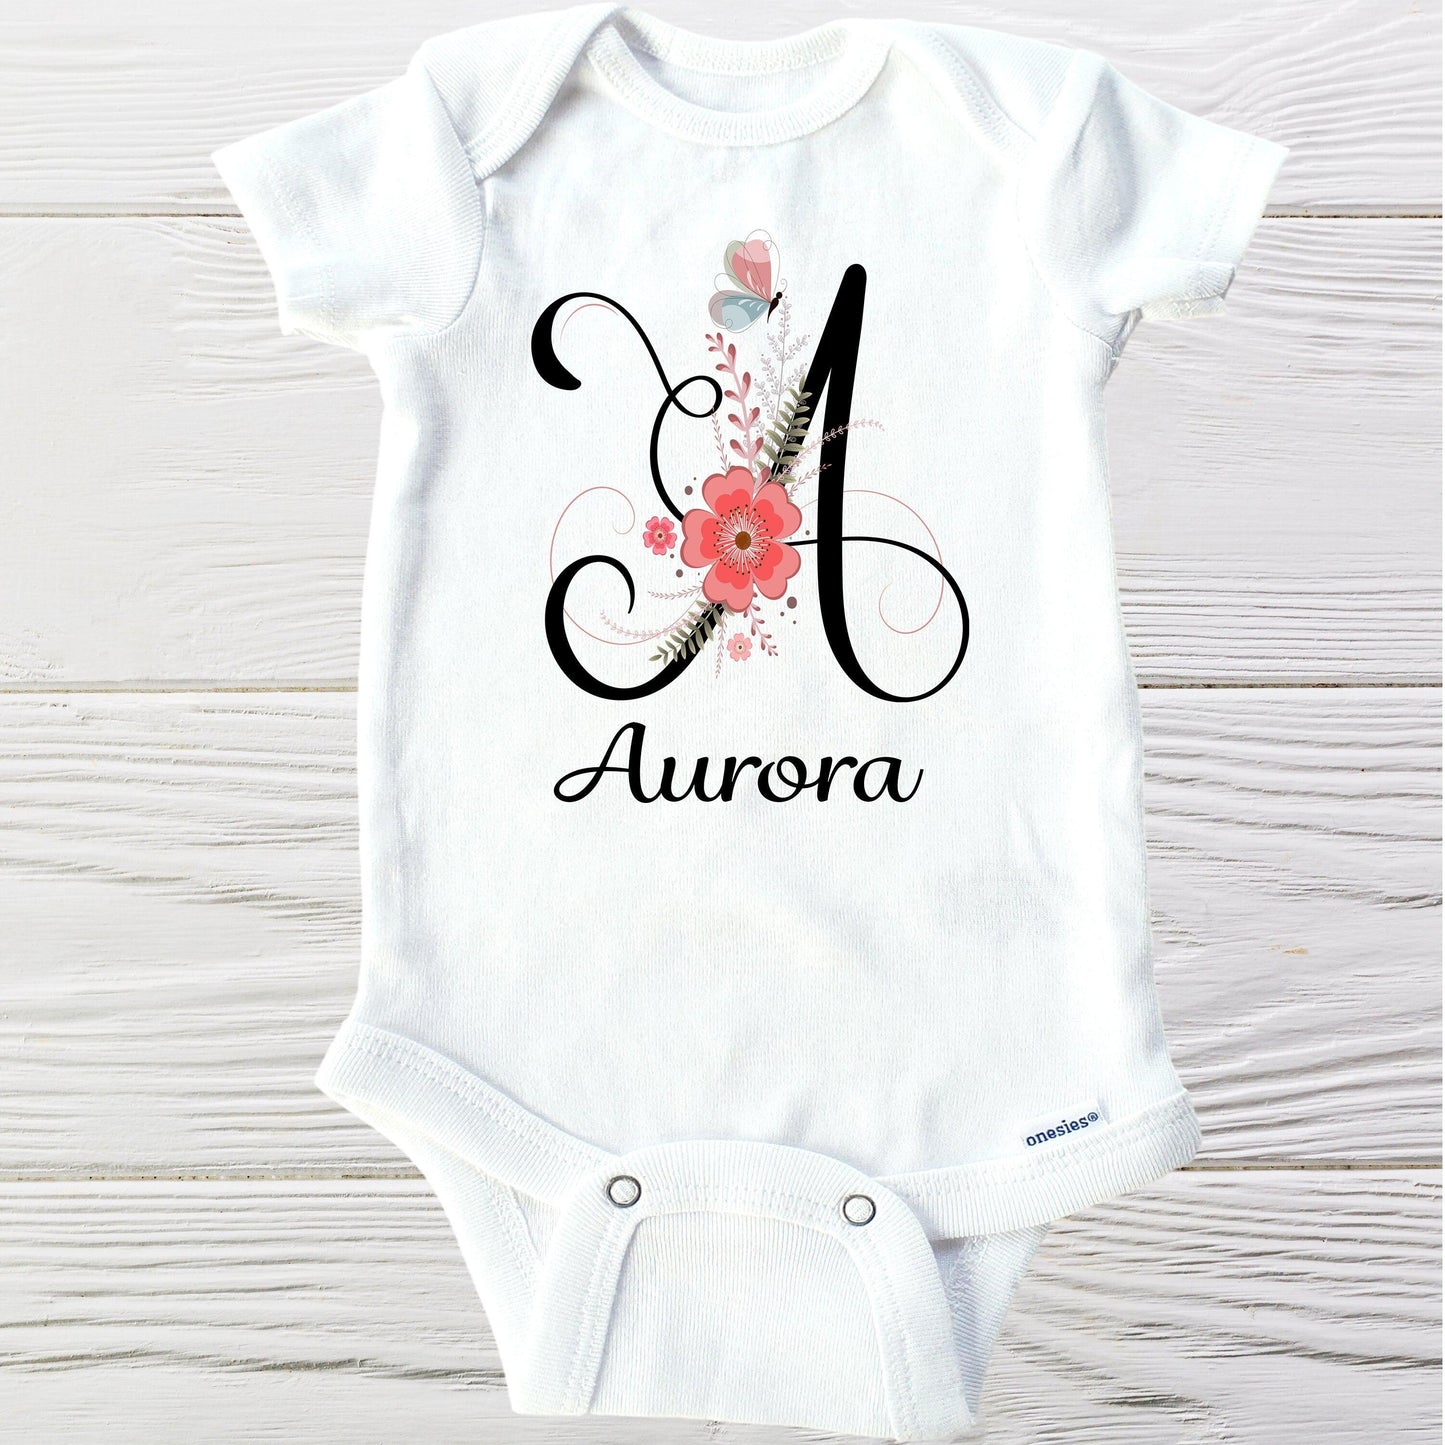 Girls personalized onesie short sleeve letter A